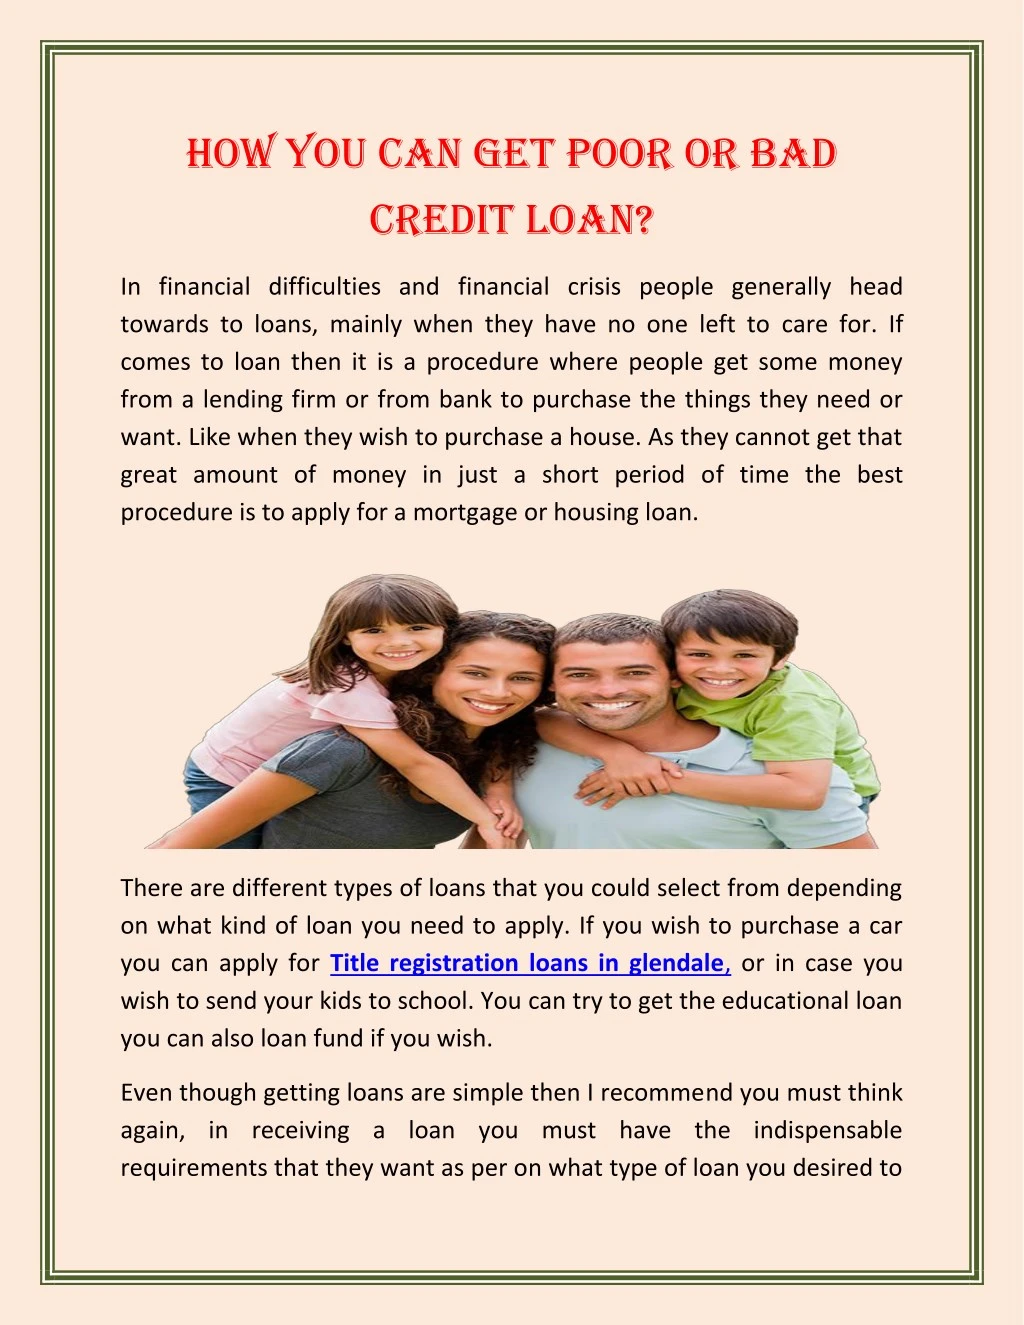 how you can get poor or bad credit loan